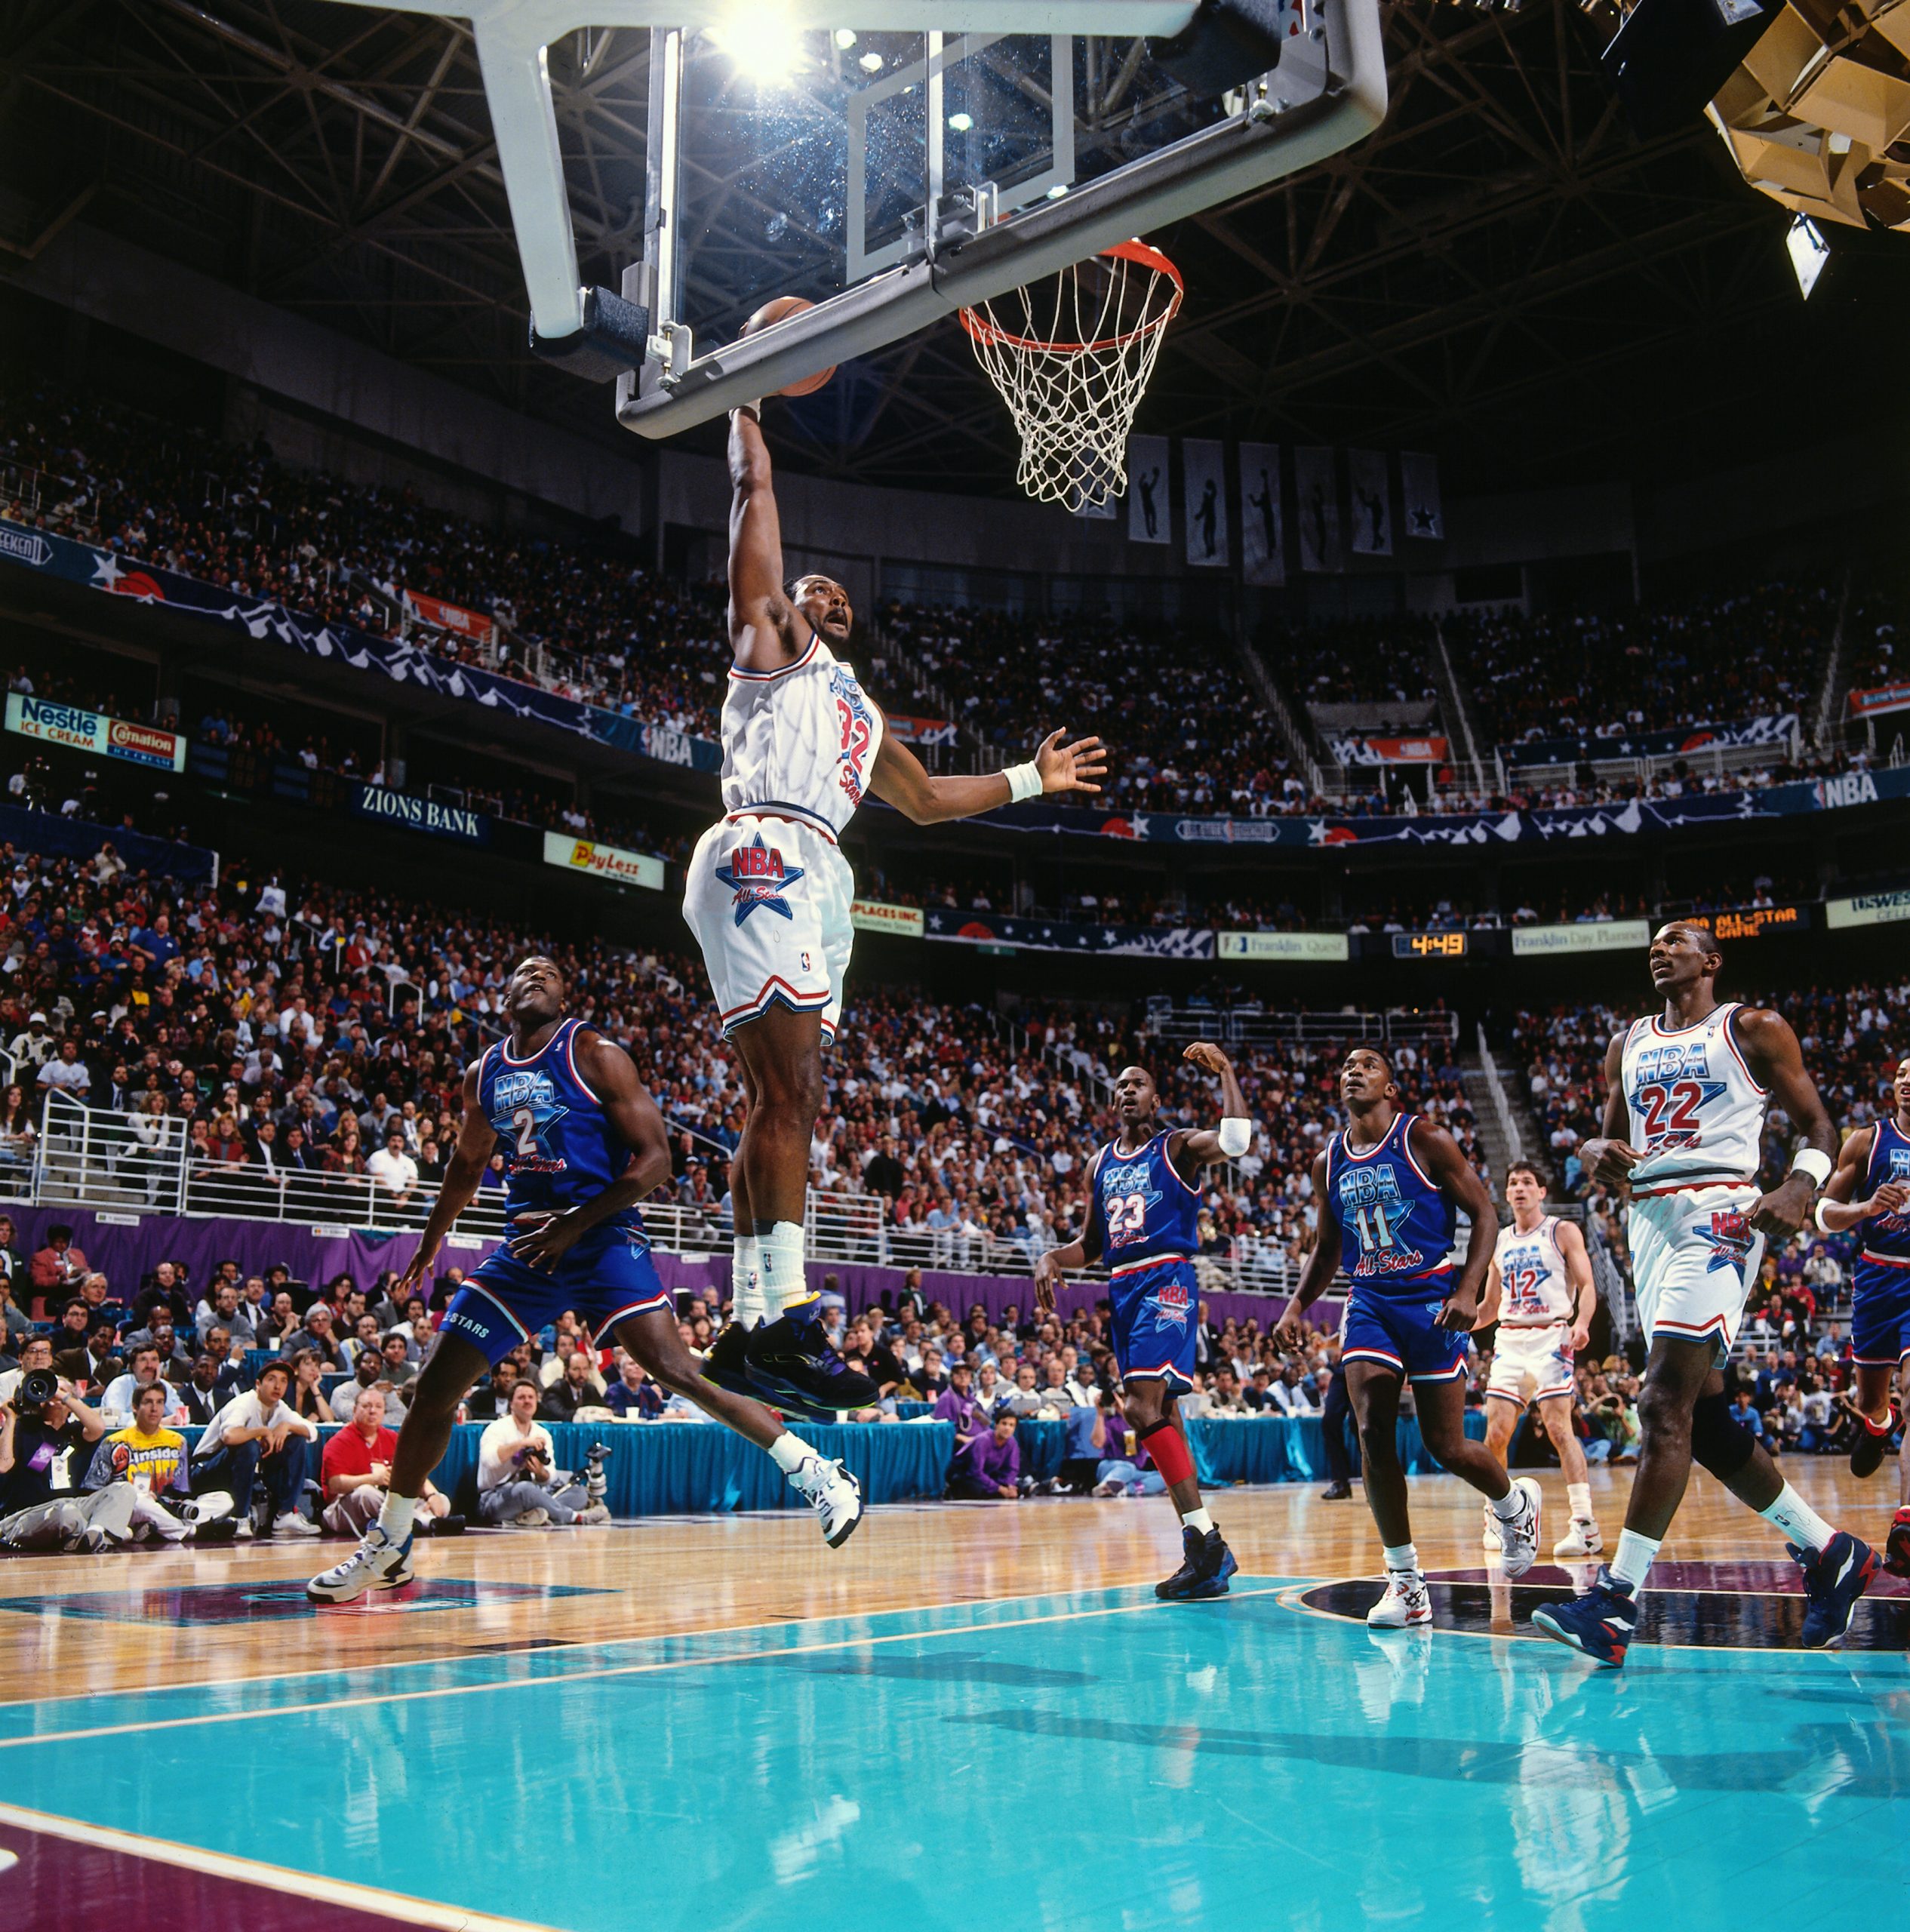 It was 25 years ago today that the NBA All-Star Game came to Utah